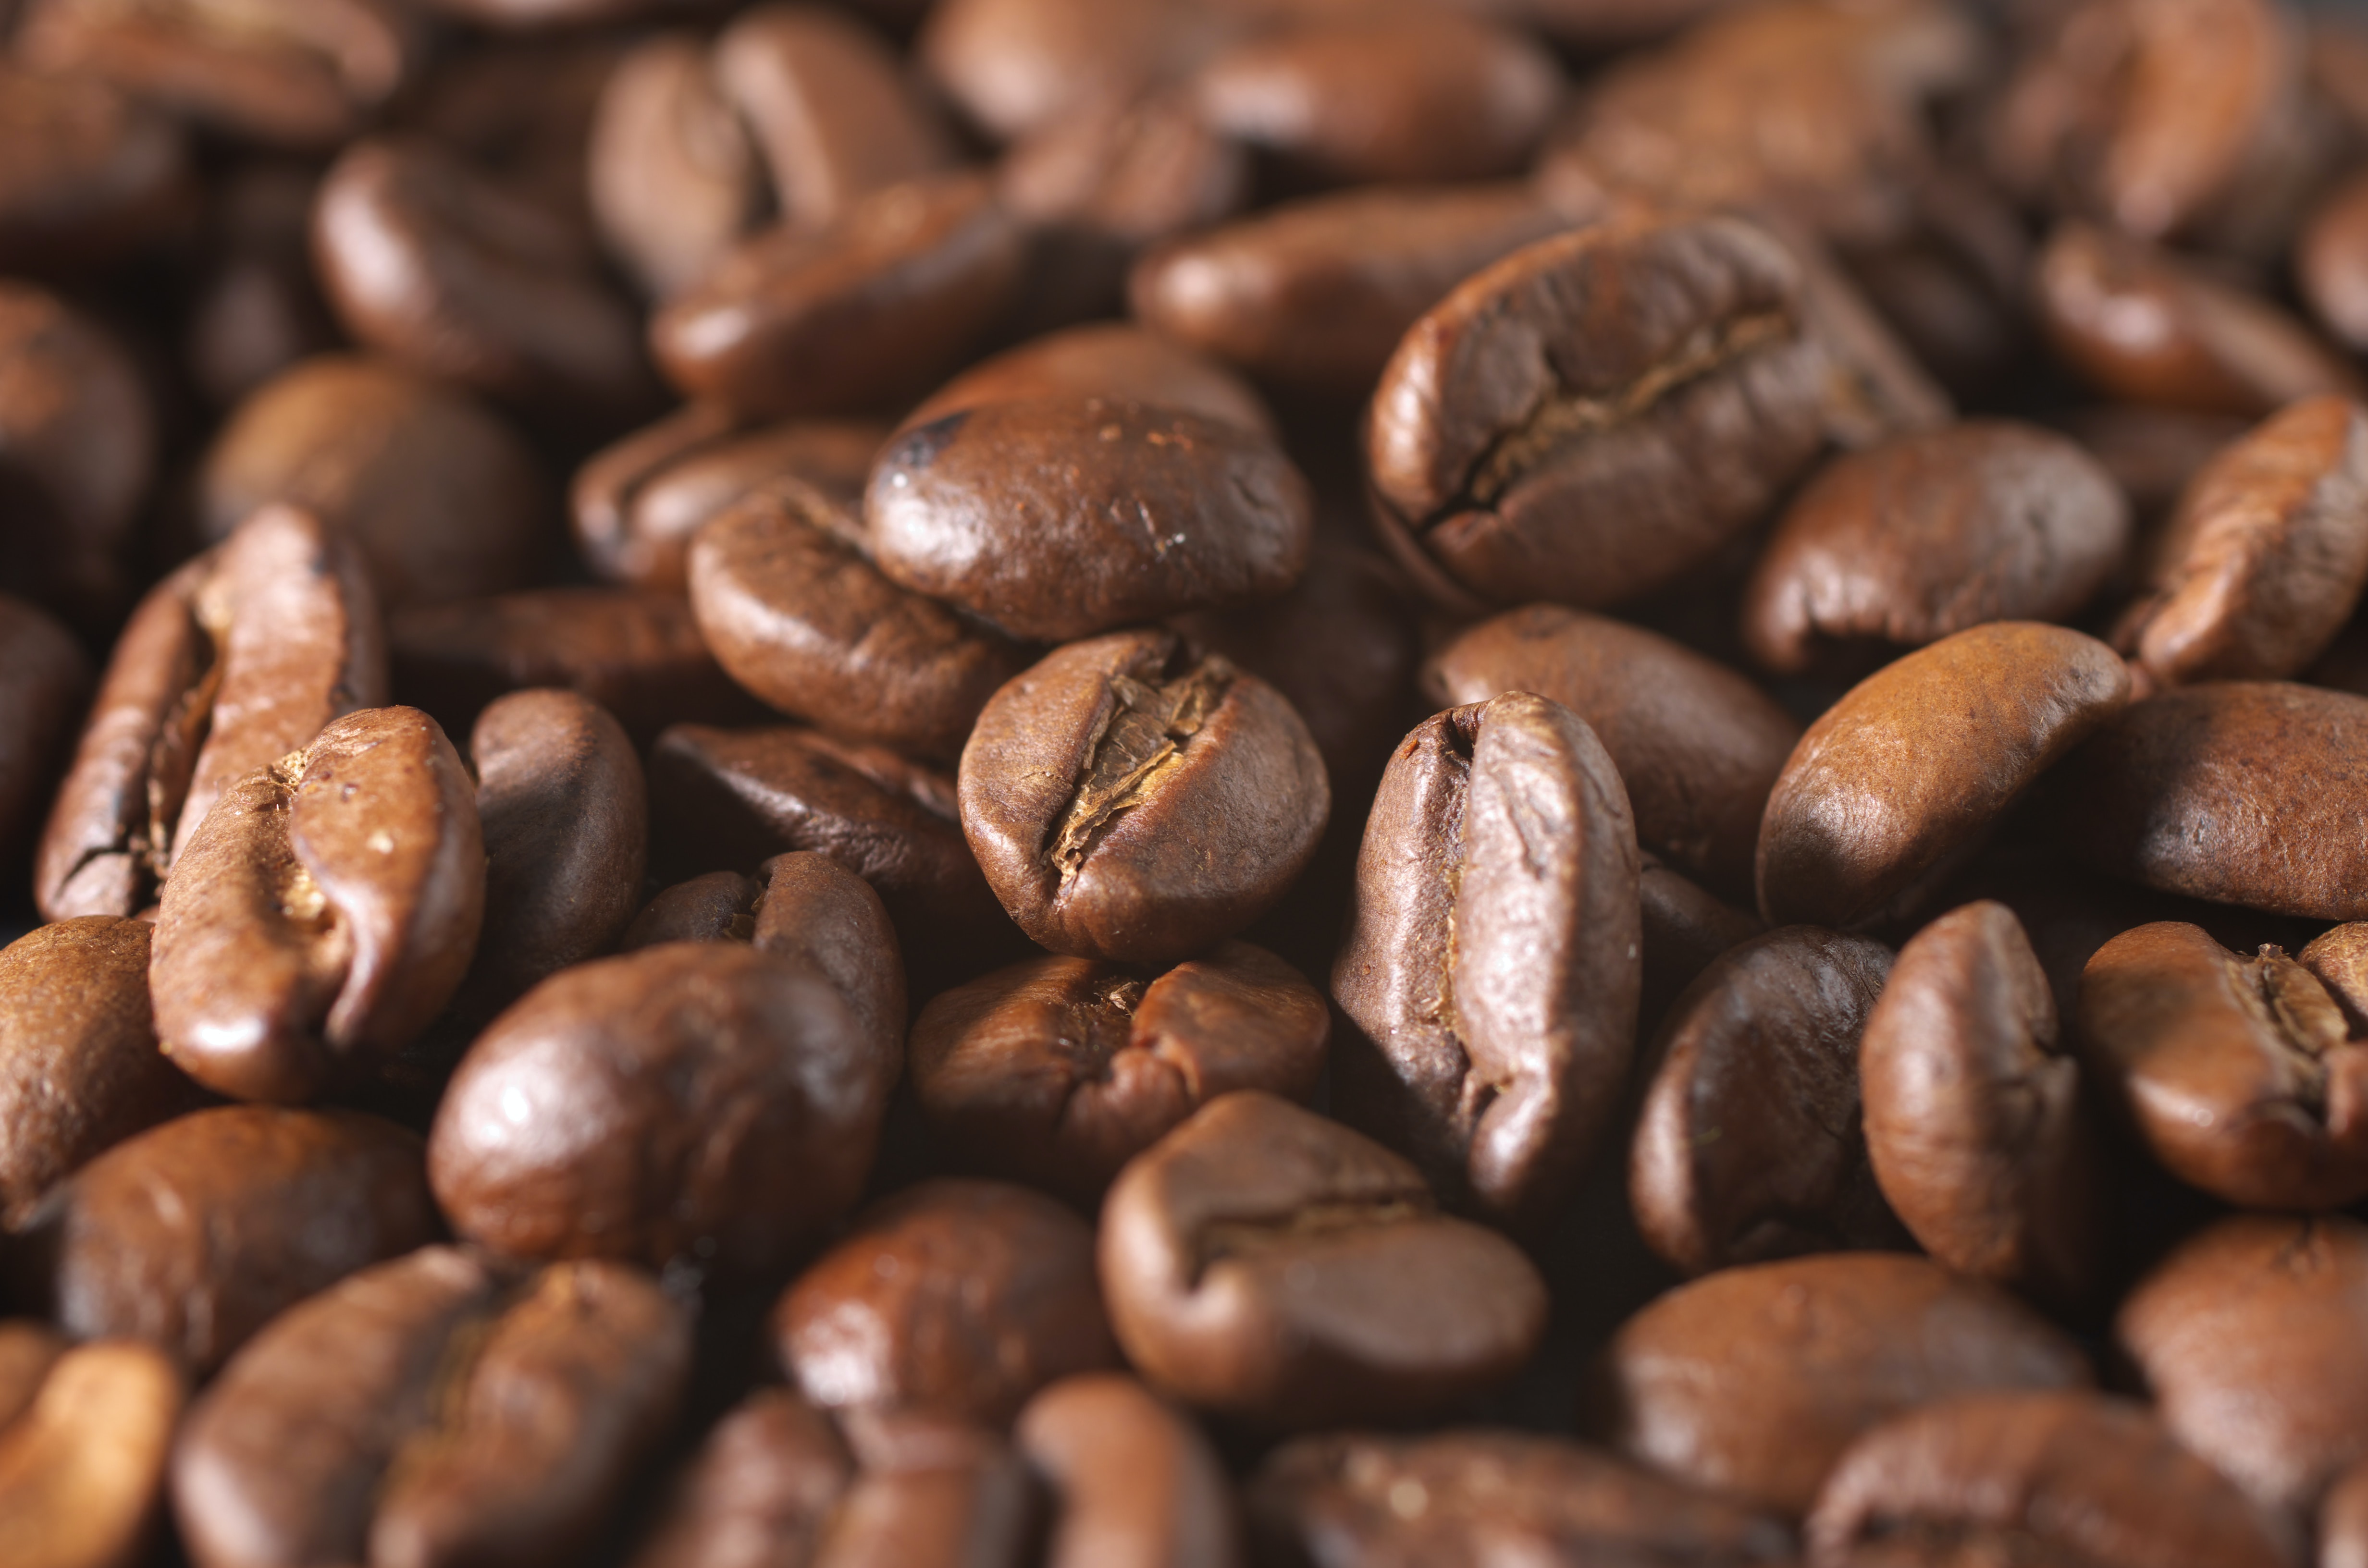 Image of roasted coffee beans.